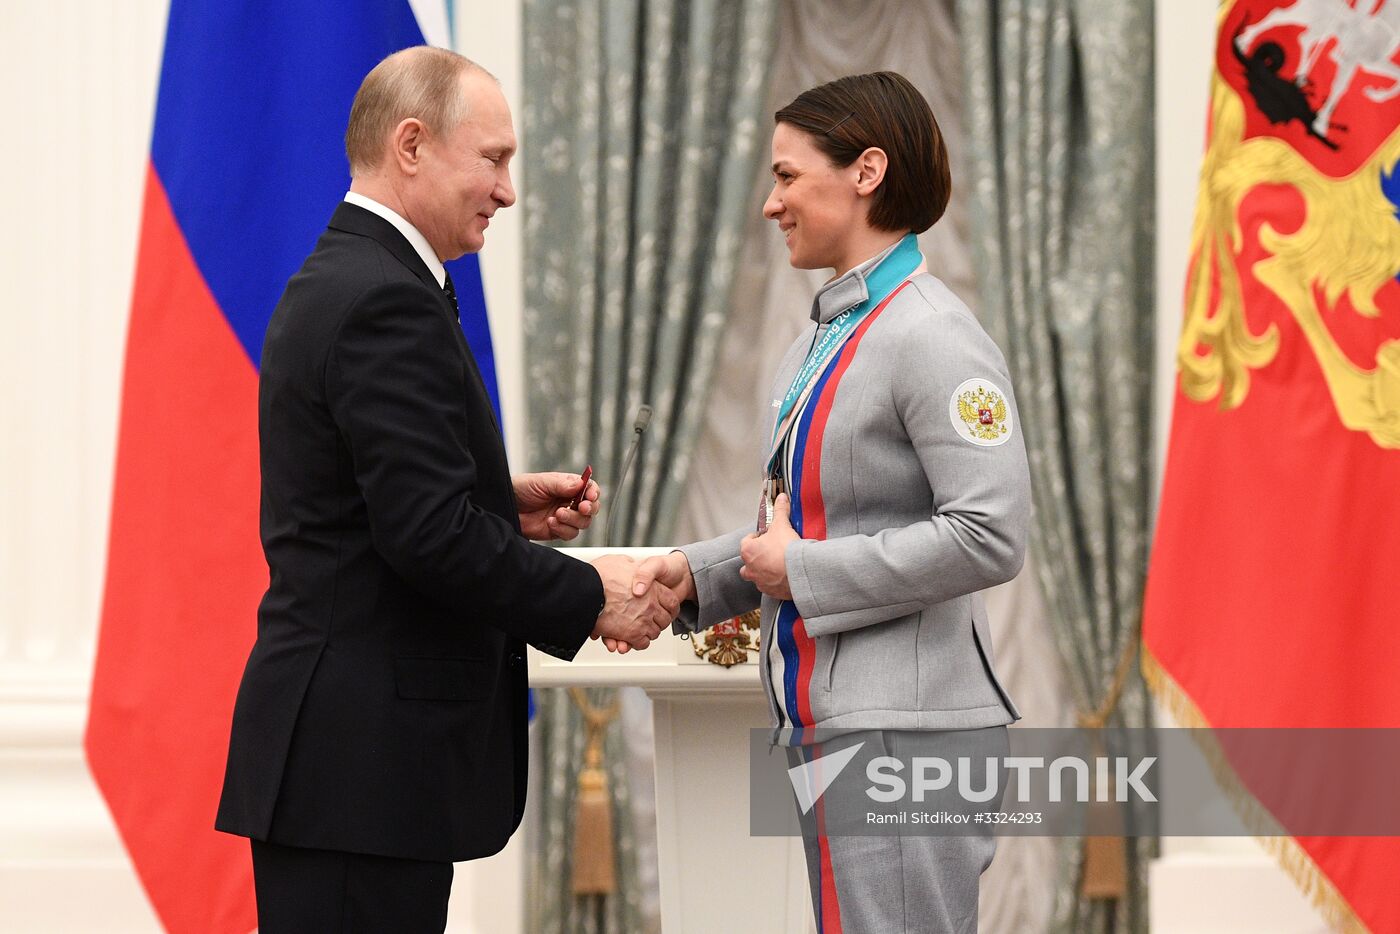 Russian President Vladimir Putin meets with Russian athletes - winners and medalists of 12th Paralympic Winter Games